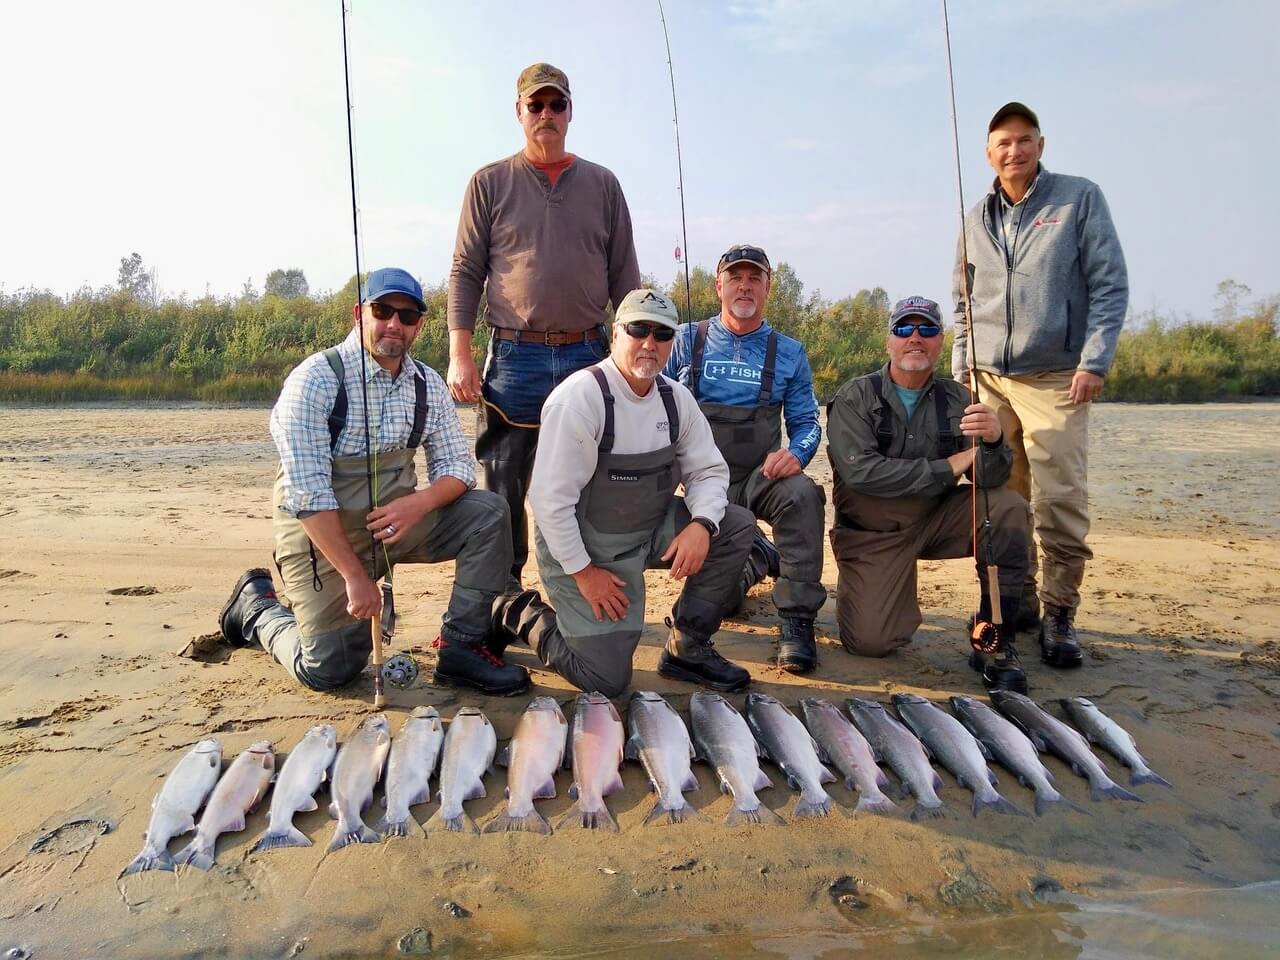 A group of anglers on the shore posing with their catch of sockeye salmon.